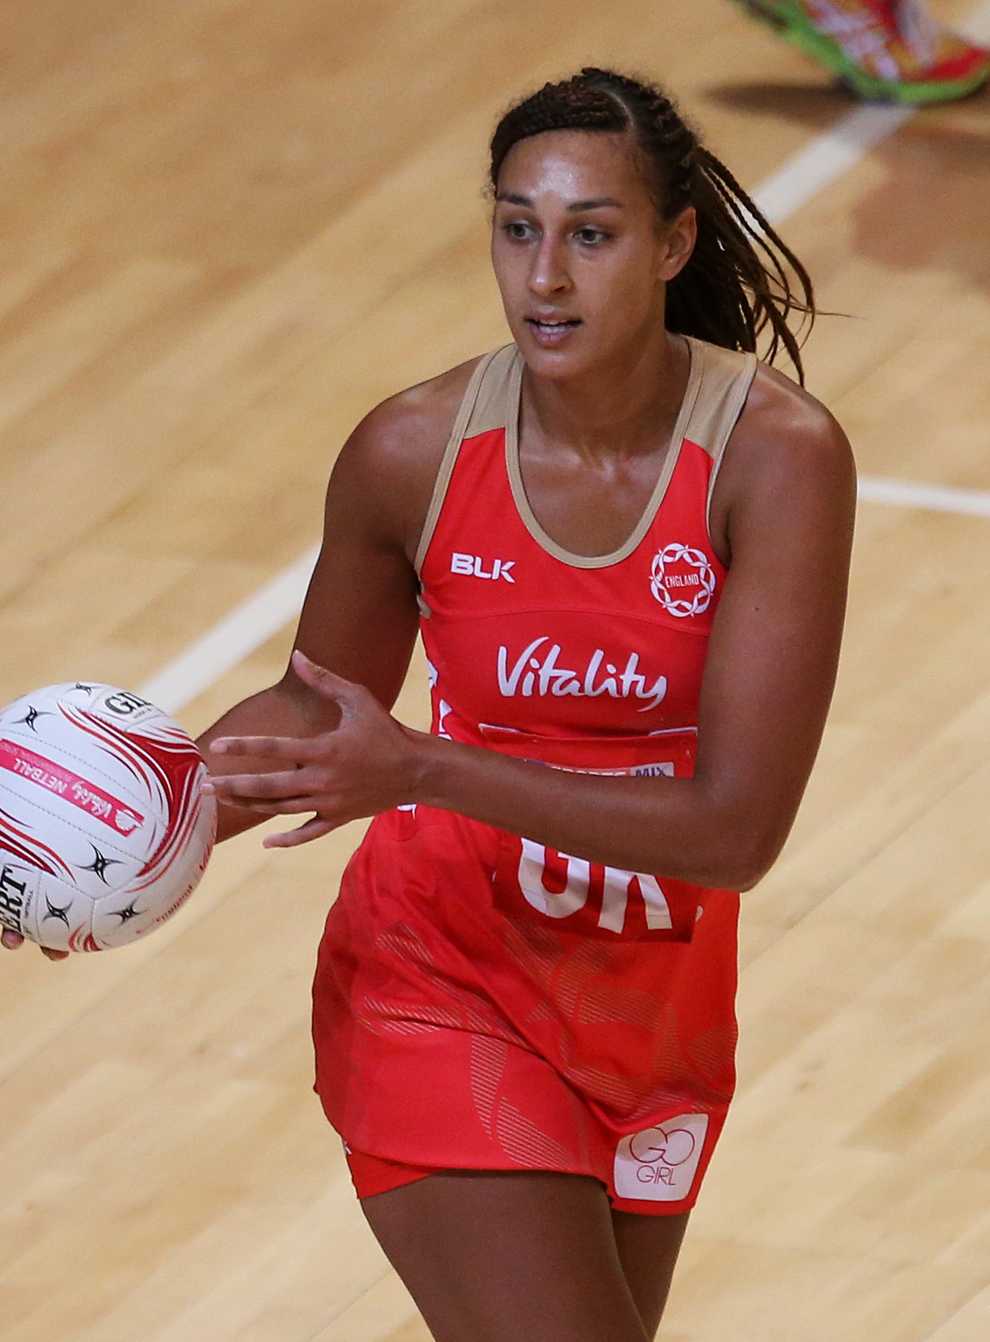 Geva was part of the England team that claimed a historic gold at the Commonwealth games in 2018